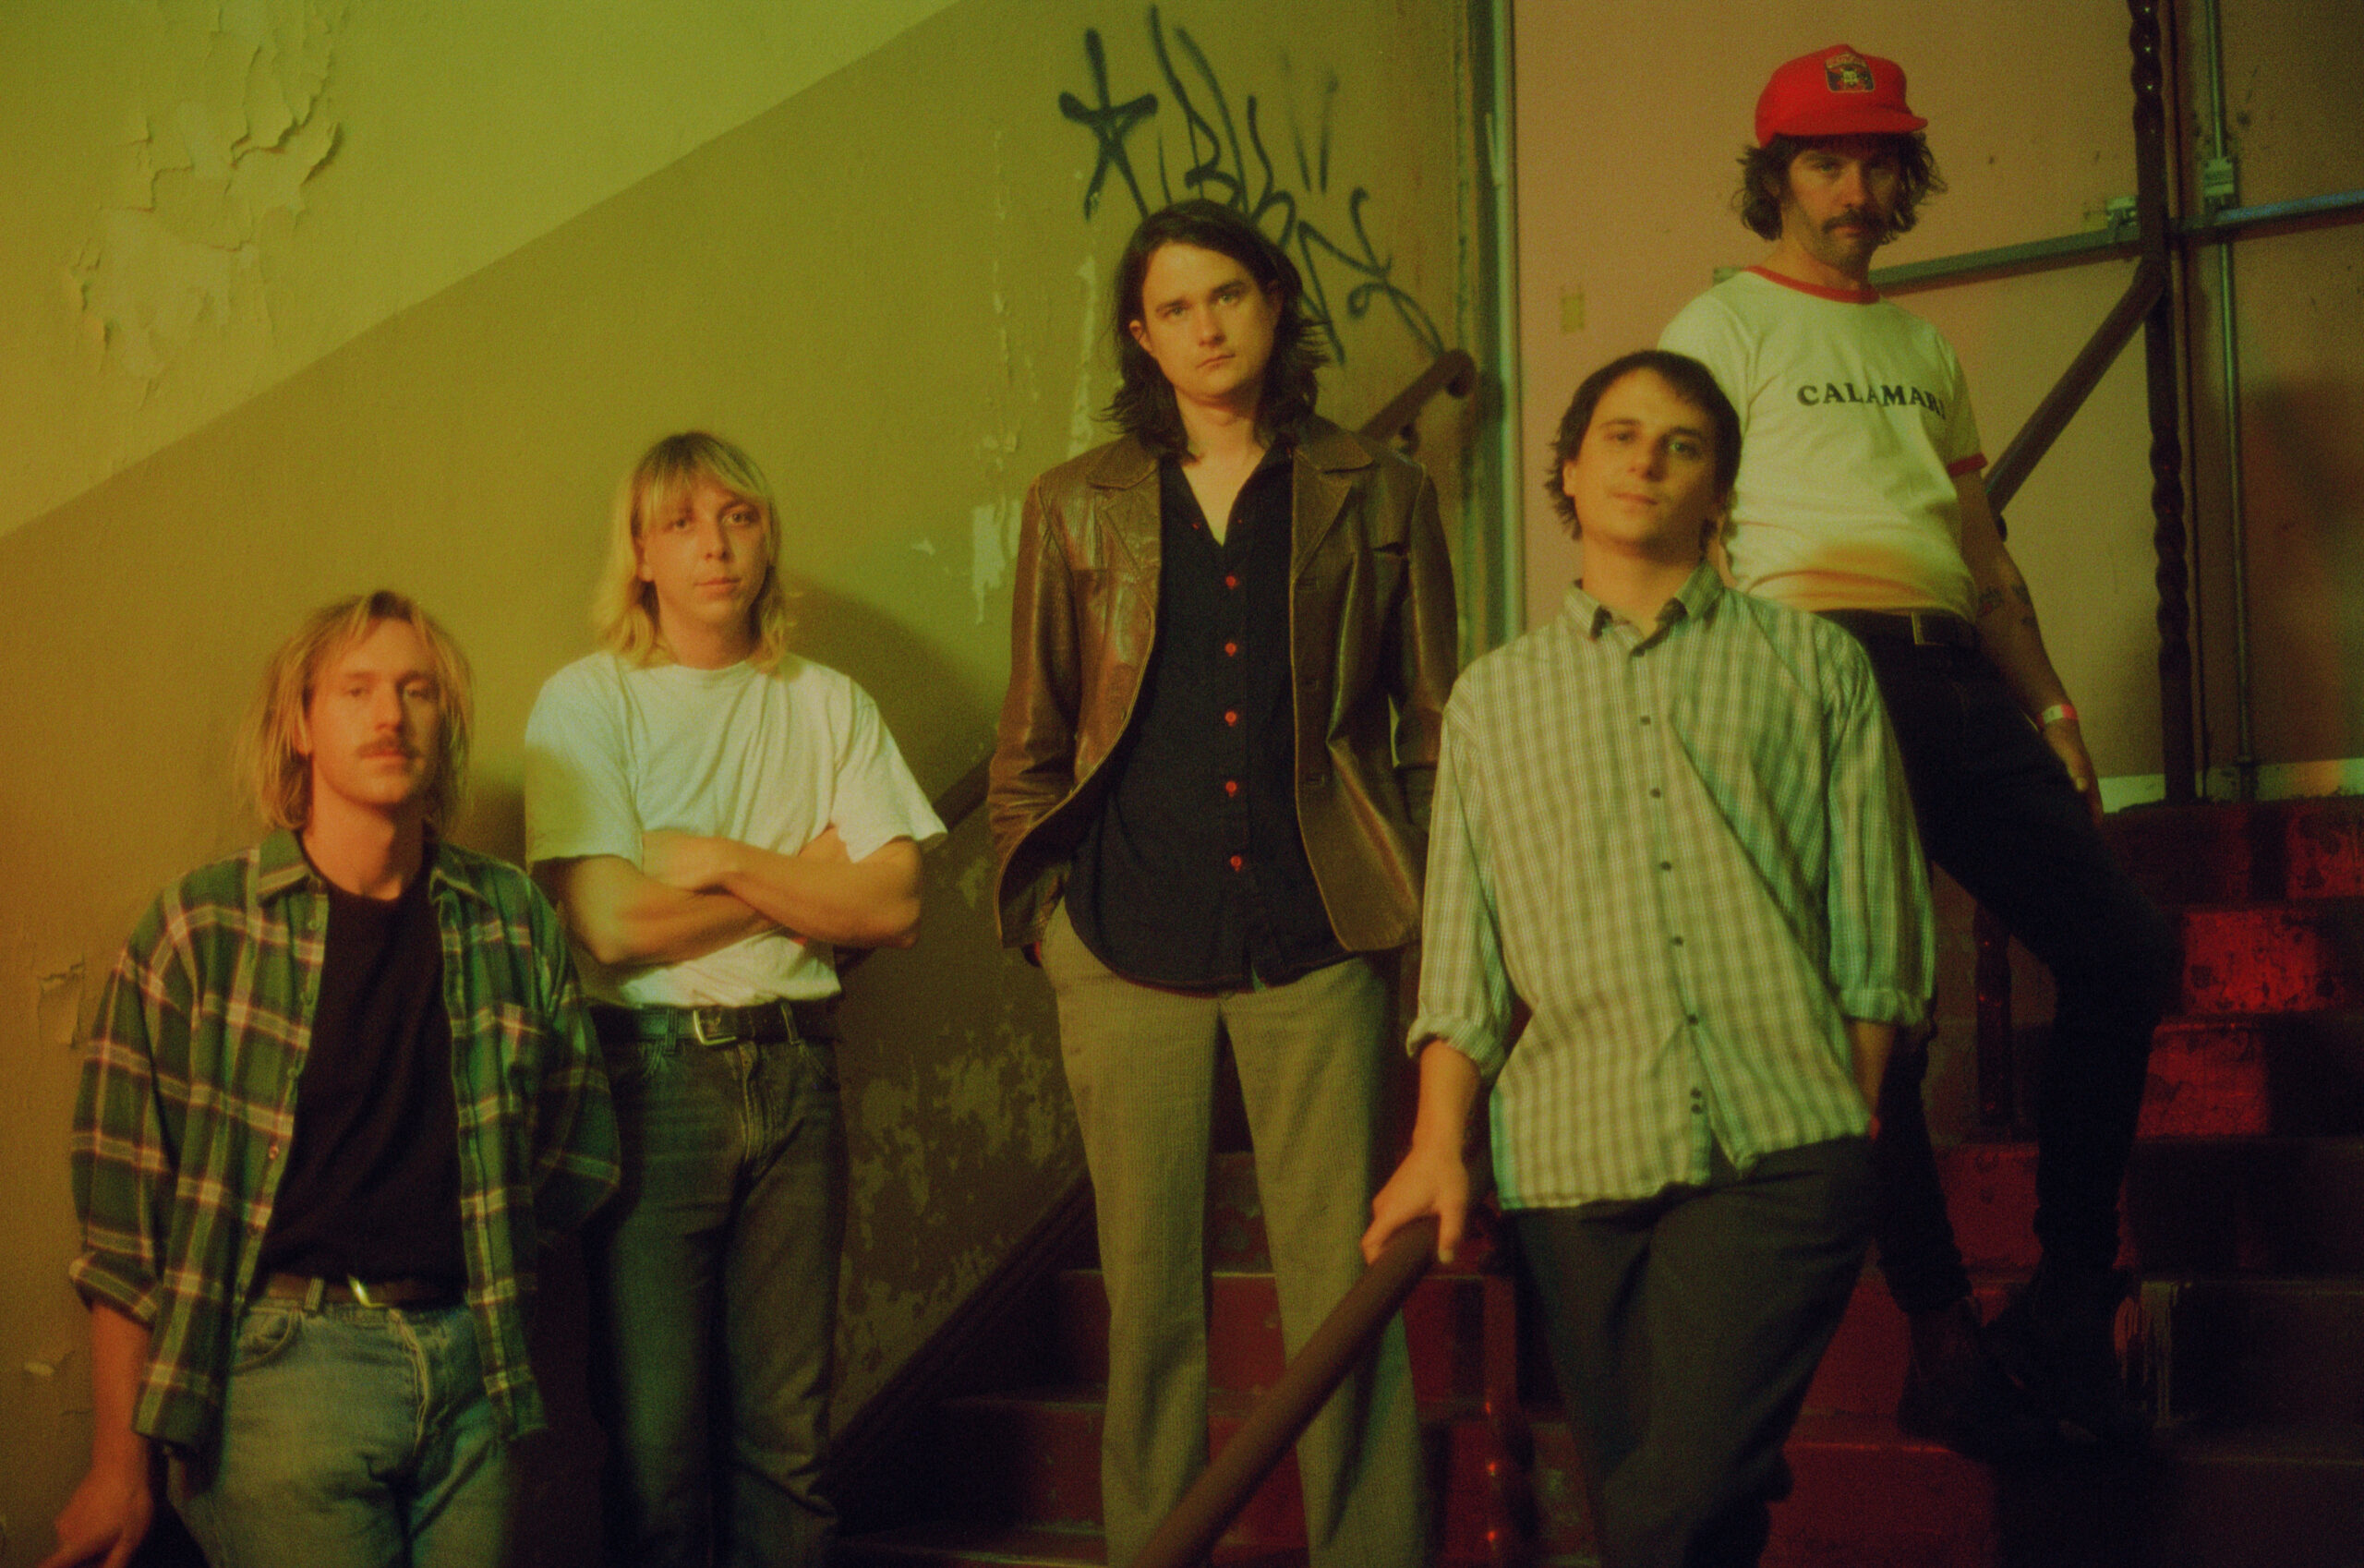 King Gizzard And The Lizard Wizard Unspools 'The Silver Cord'